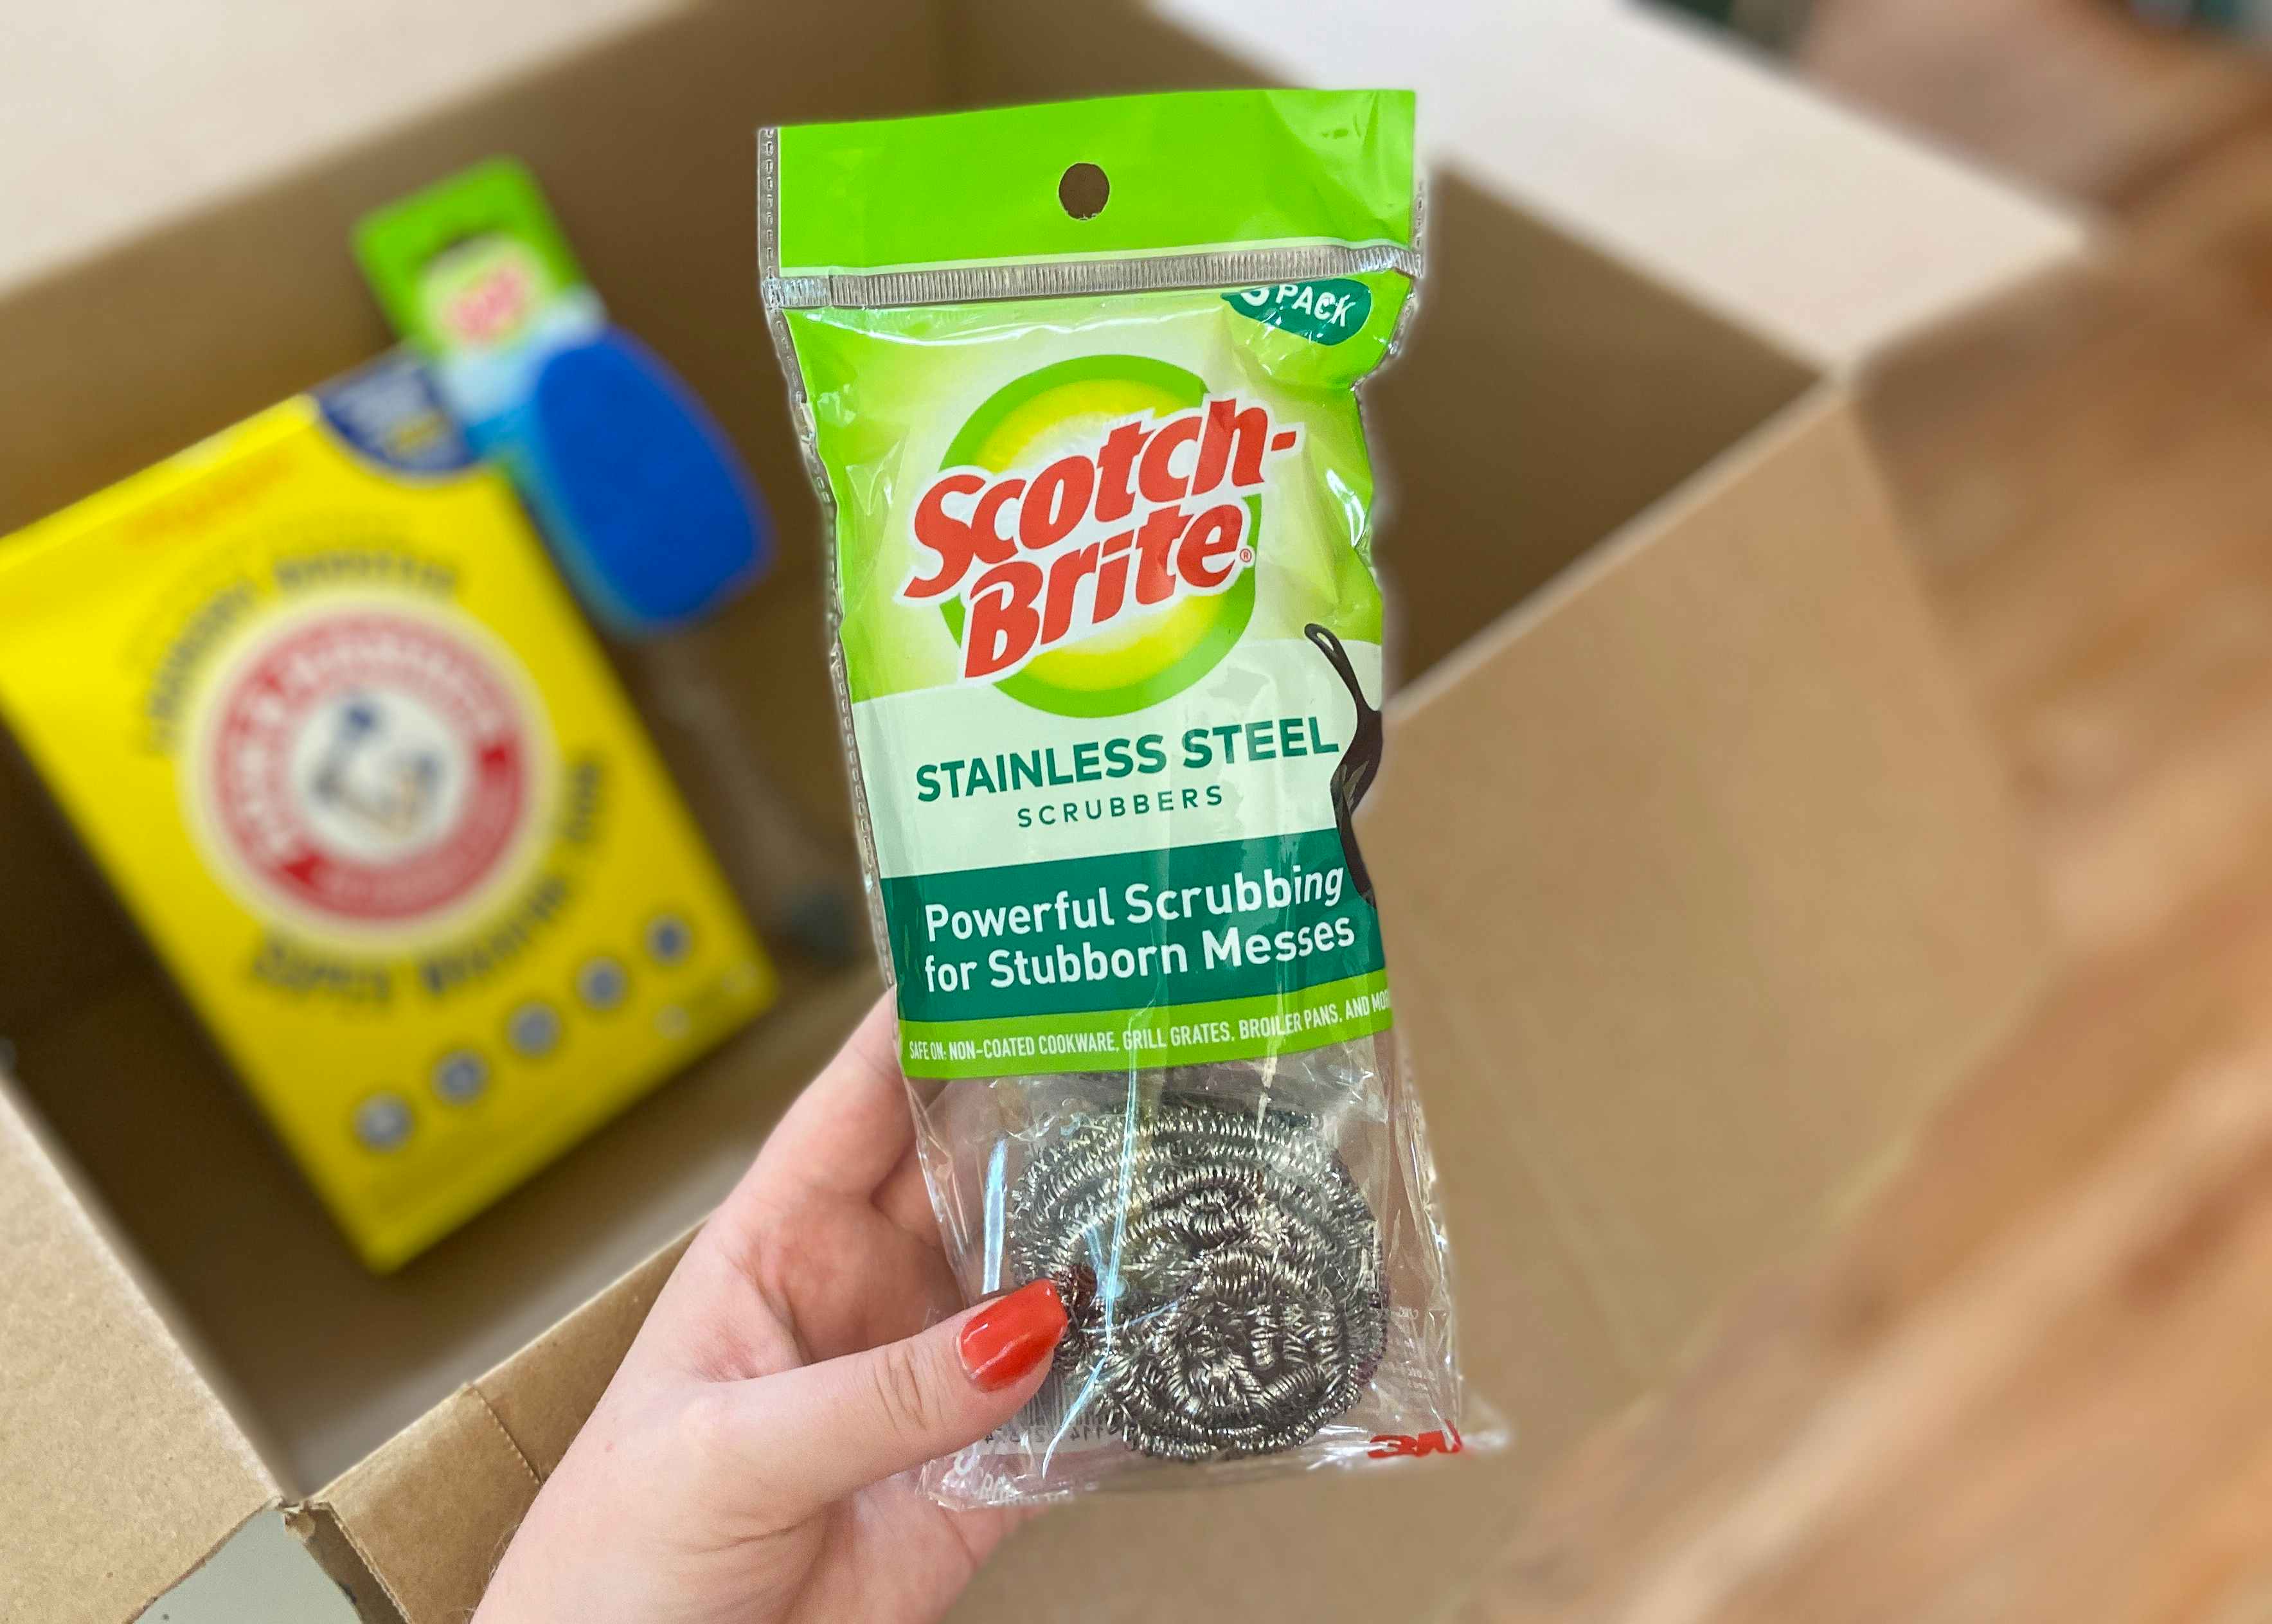 hand holding scotch brite stainless steel scrubbers in front of an amazon box